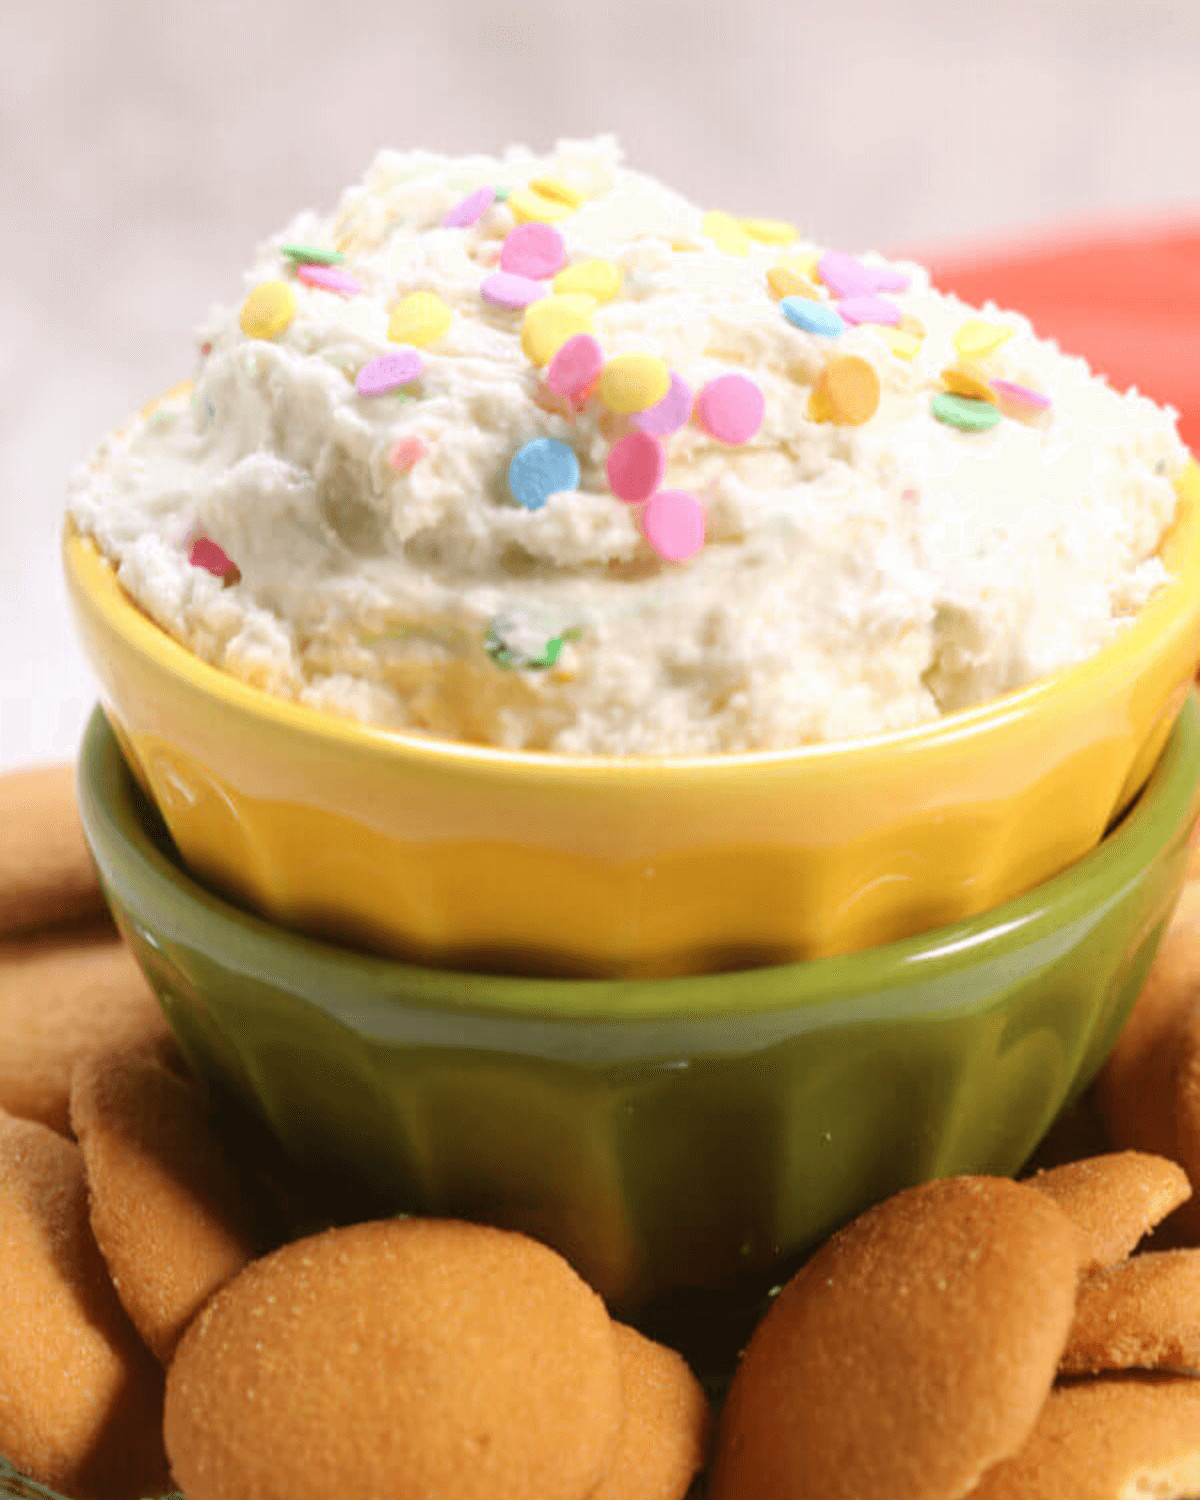 A bowl of funfetti dessert dip with sprinkles, served with cookie wafers.